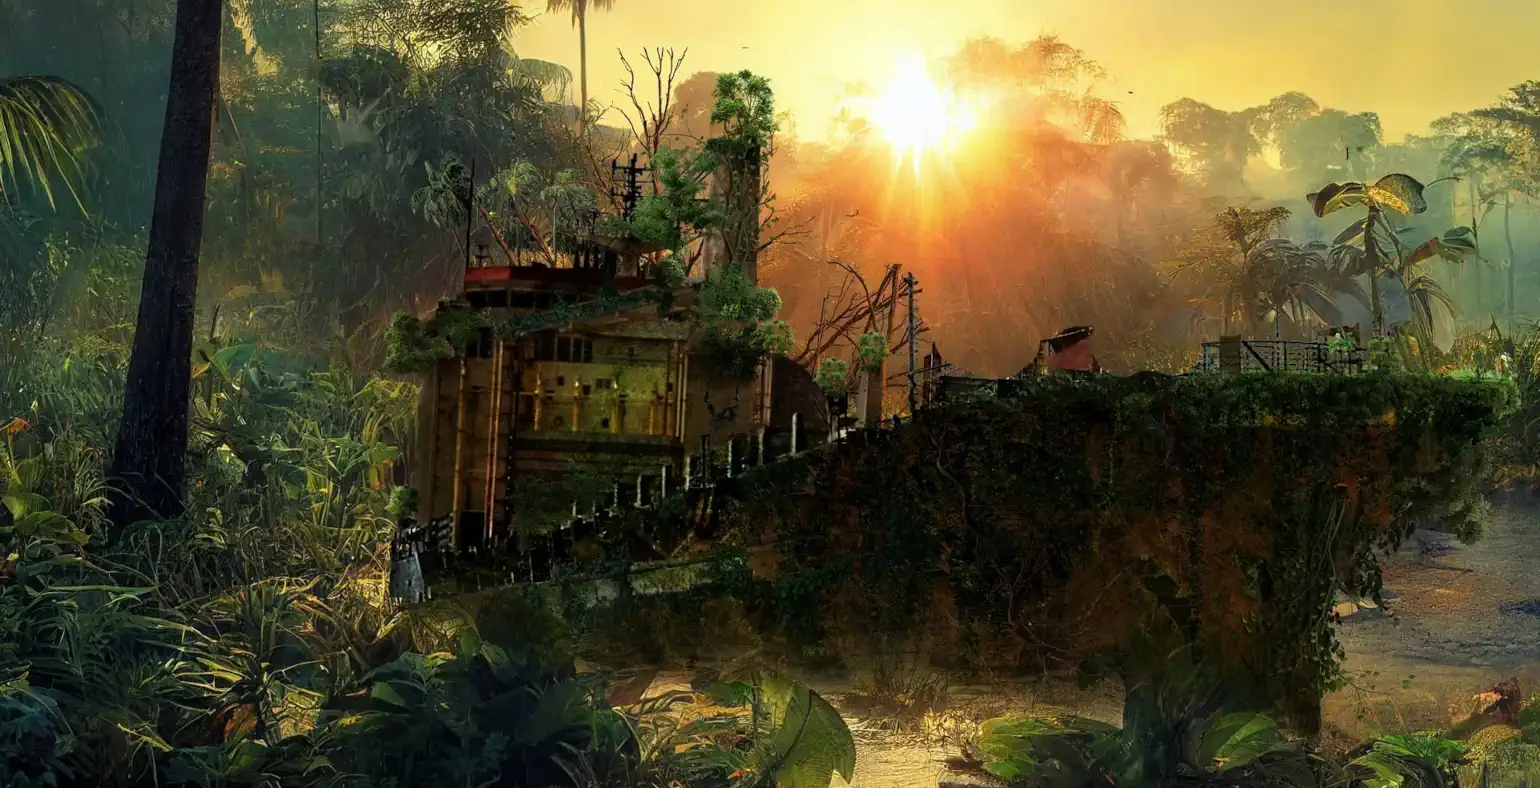 Fantasy painting of a shipwreck in a jungle backlit by sunlight